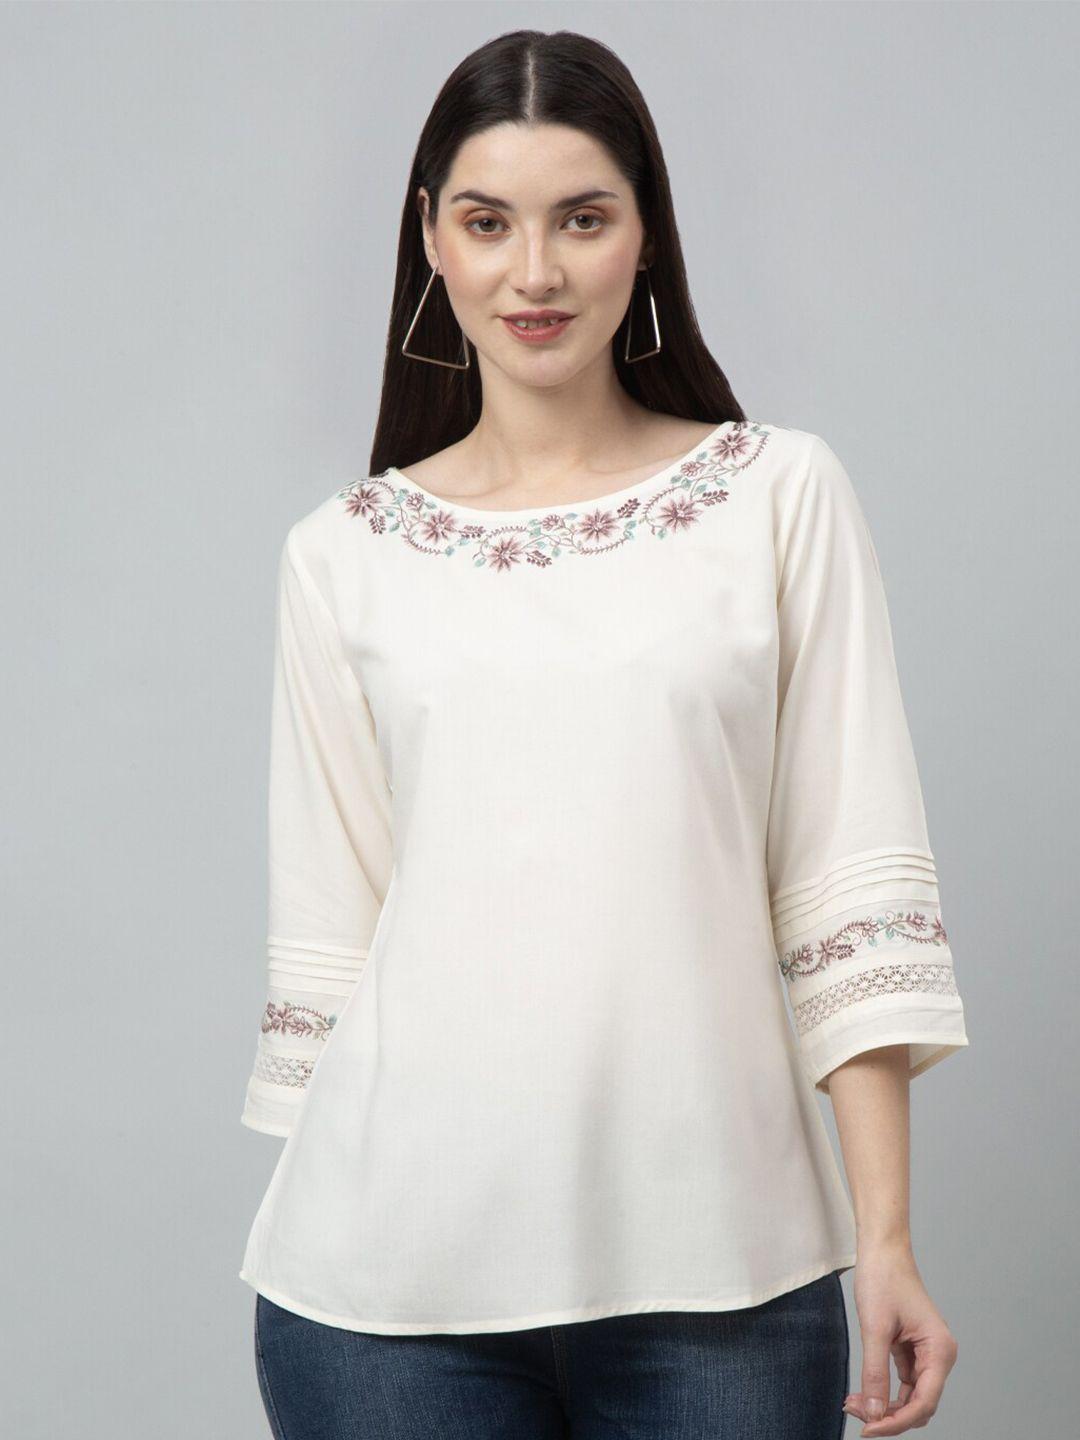 gracit floral embroidery boat neck three-quarter sleeves top